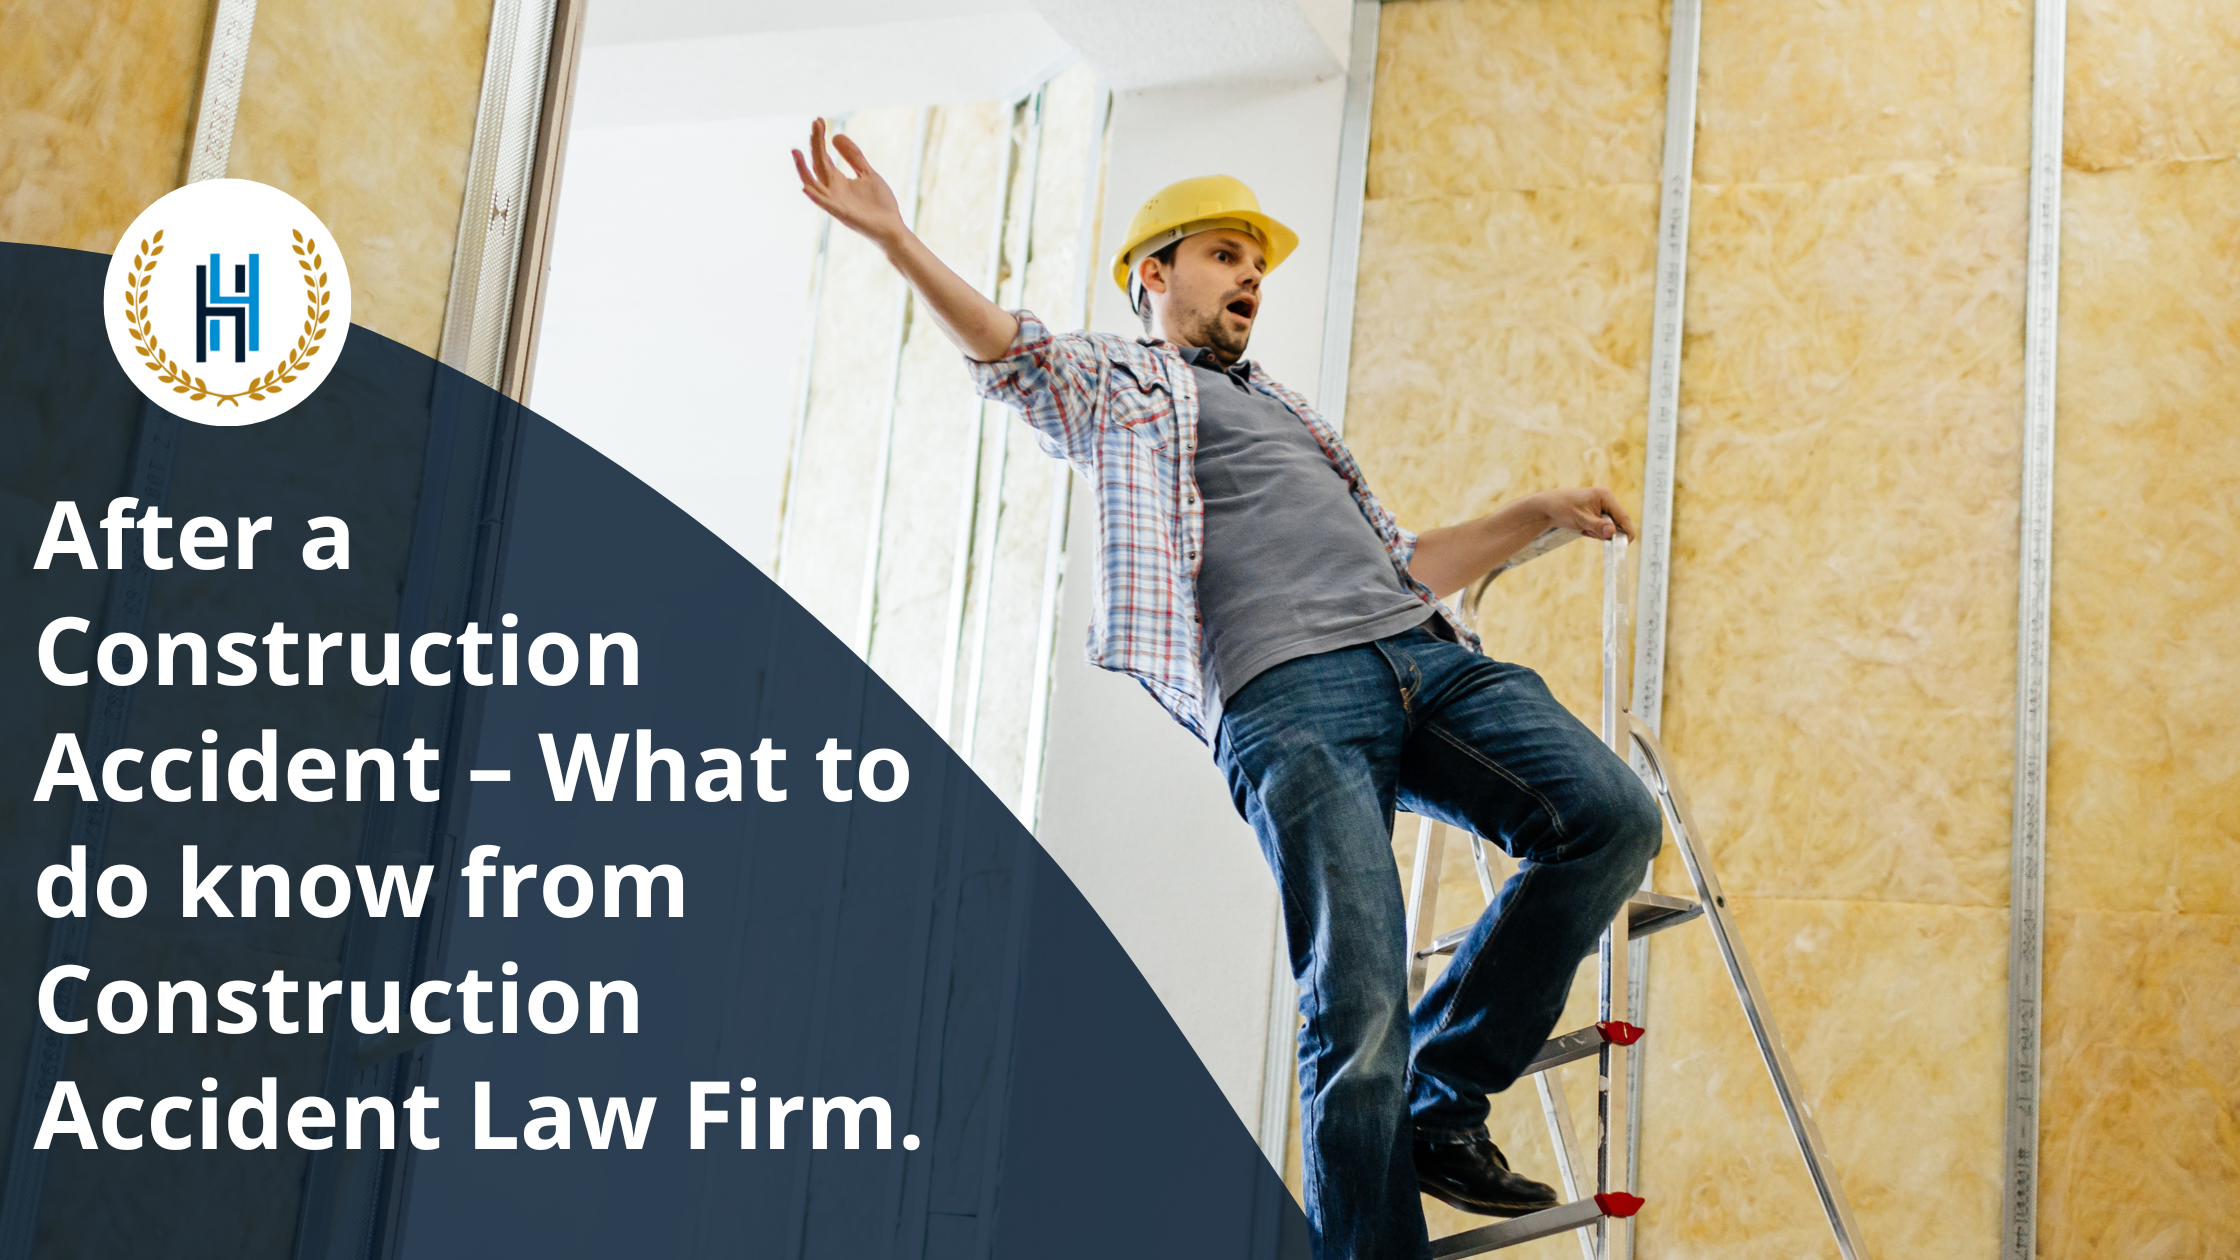 After a Construction Accident – What to do know from Construction Accident Law Firm. | 2H Law